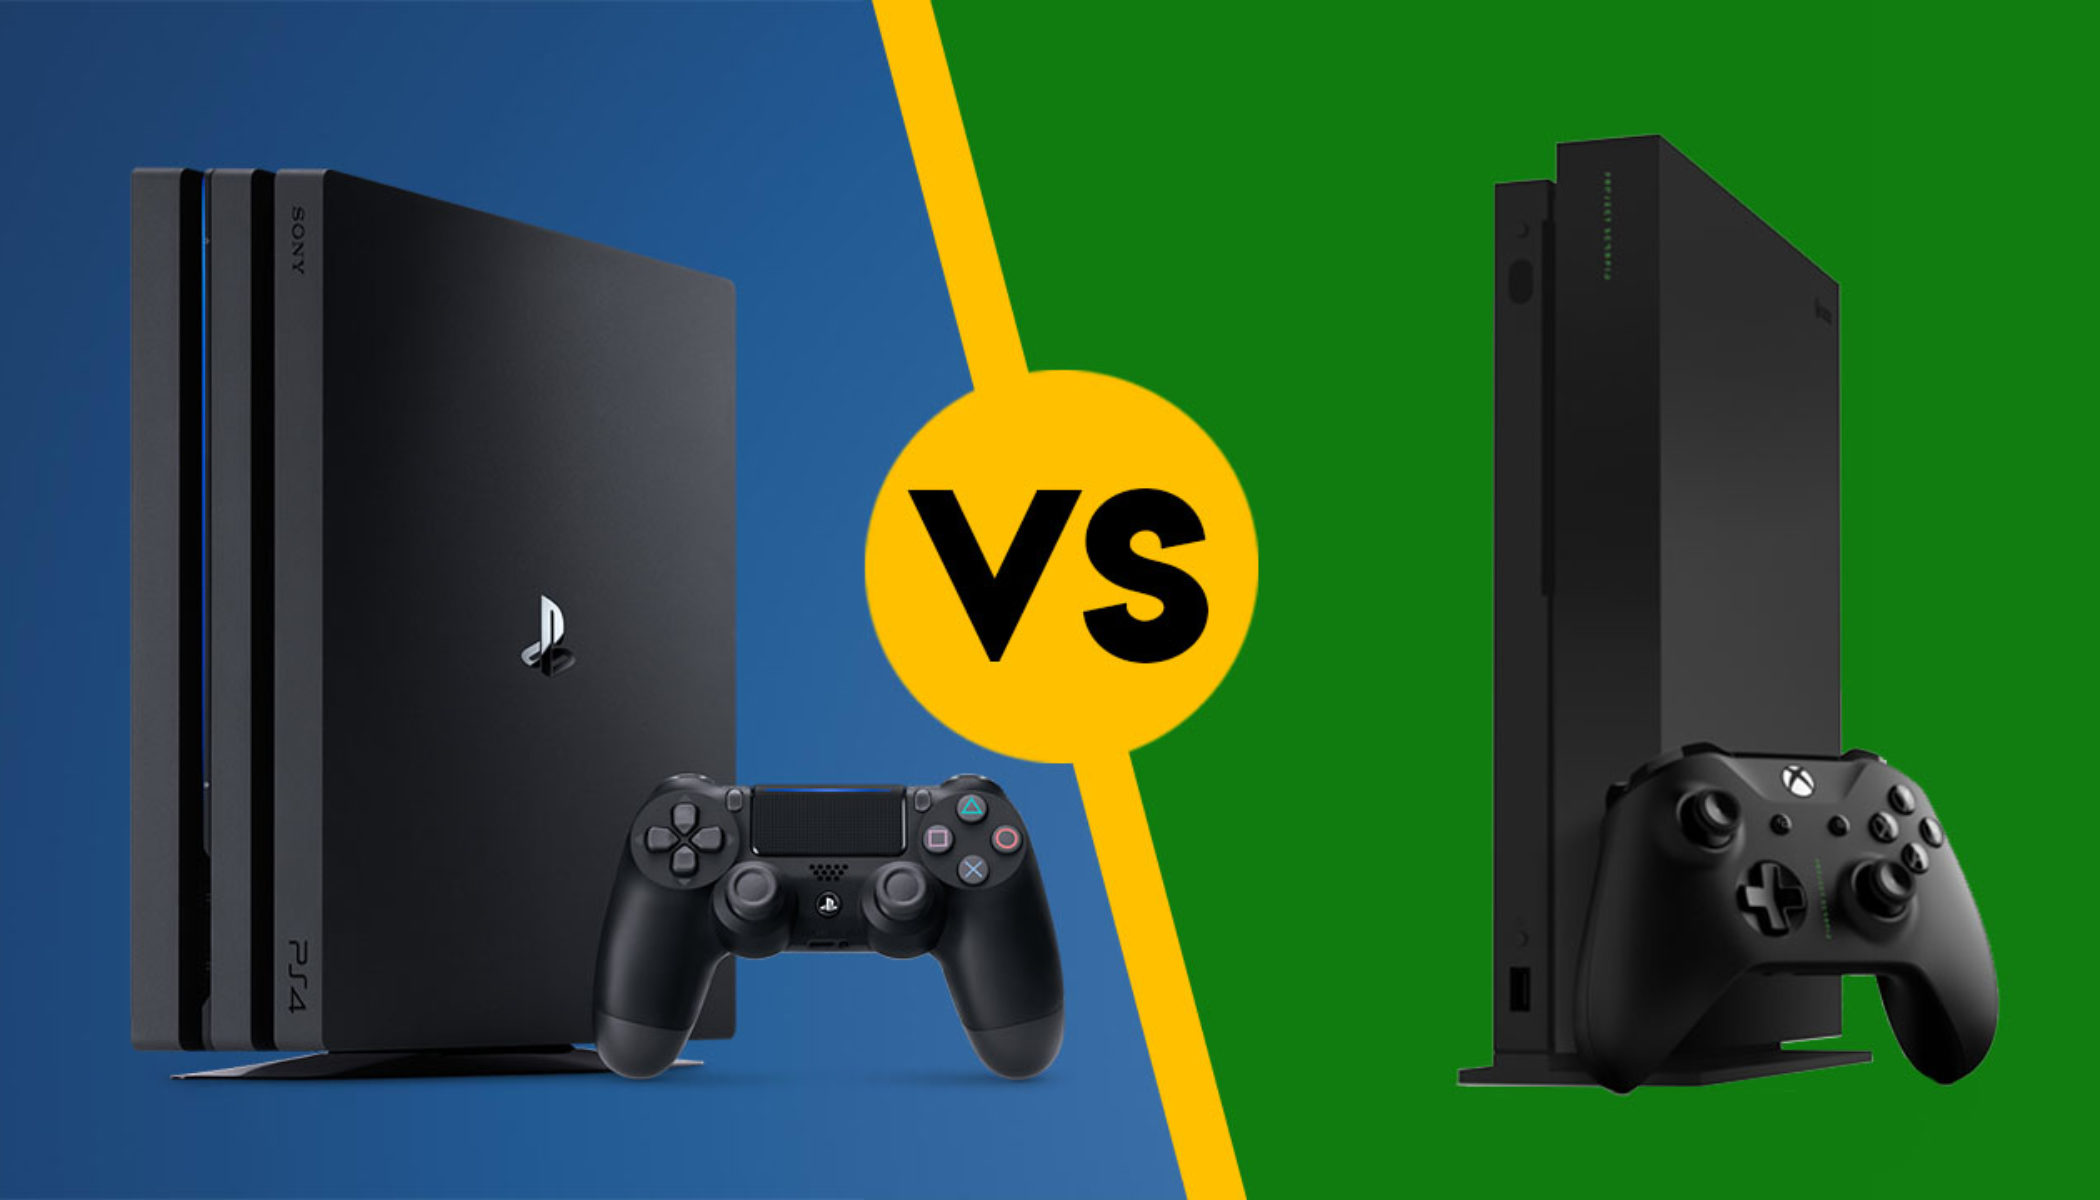 ps4 pro vs xbox one x which is better